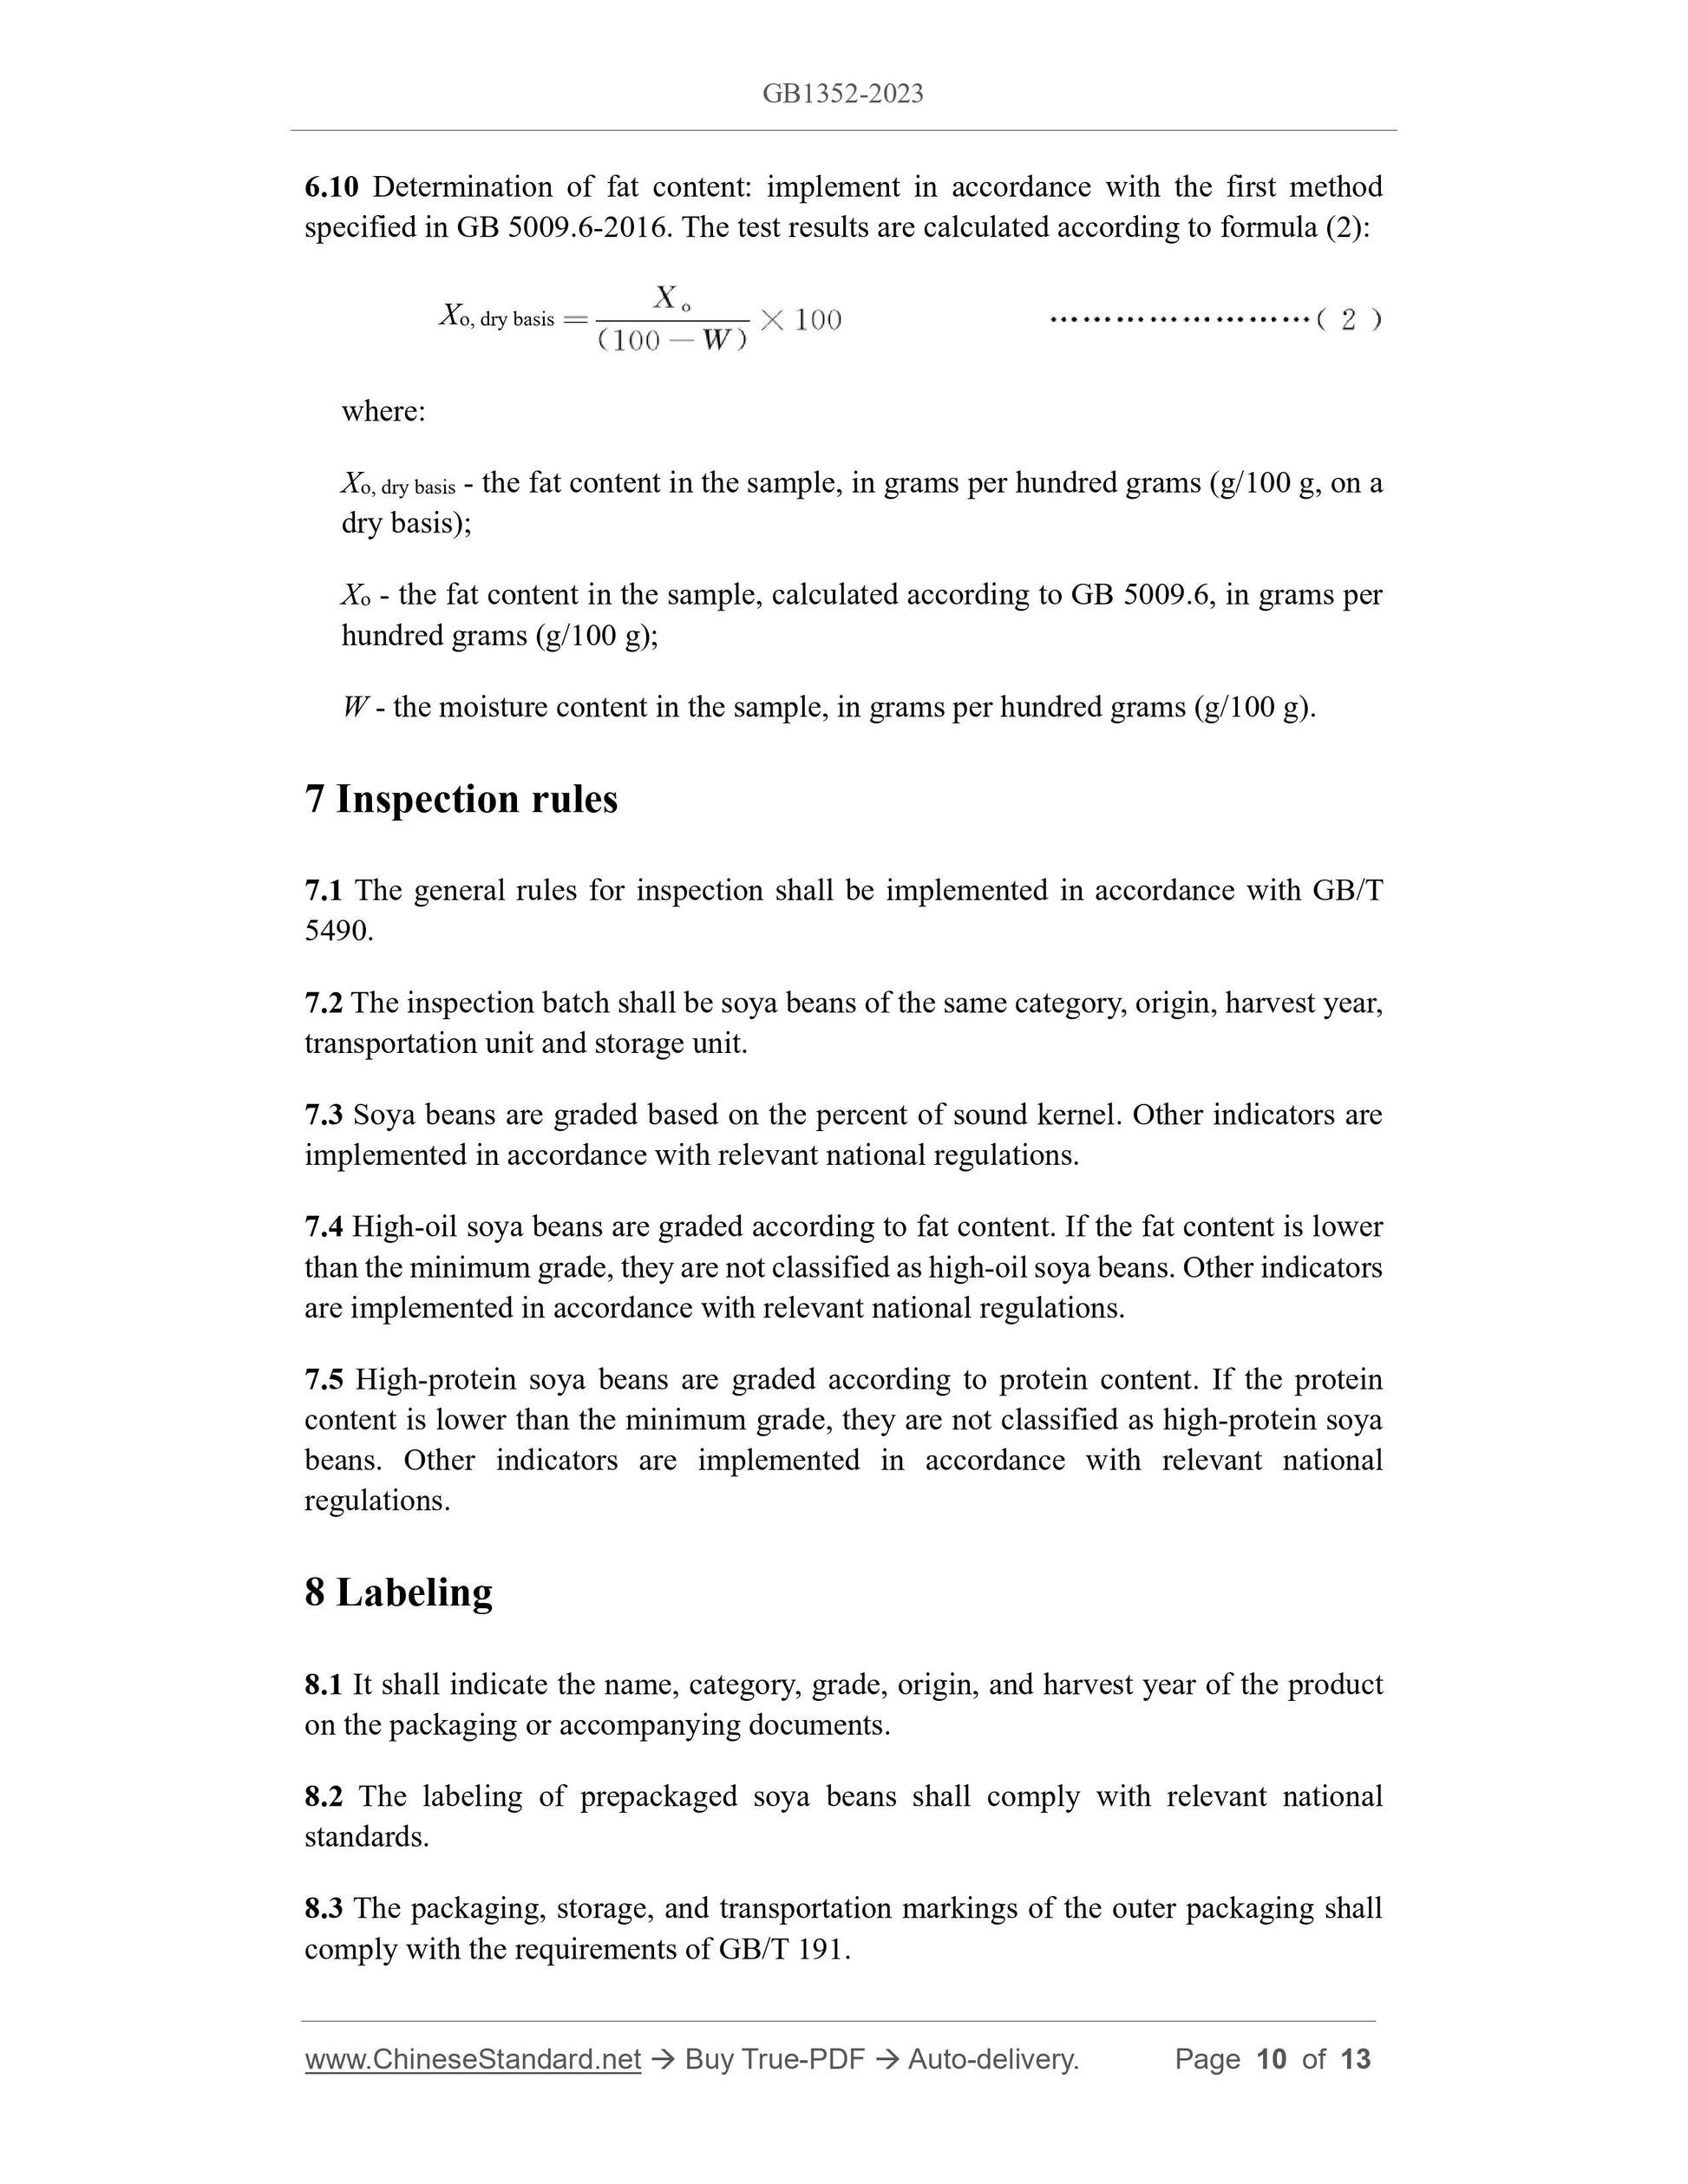 GB 1352-2023 Page 6